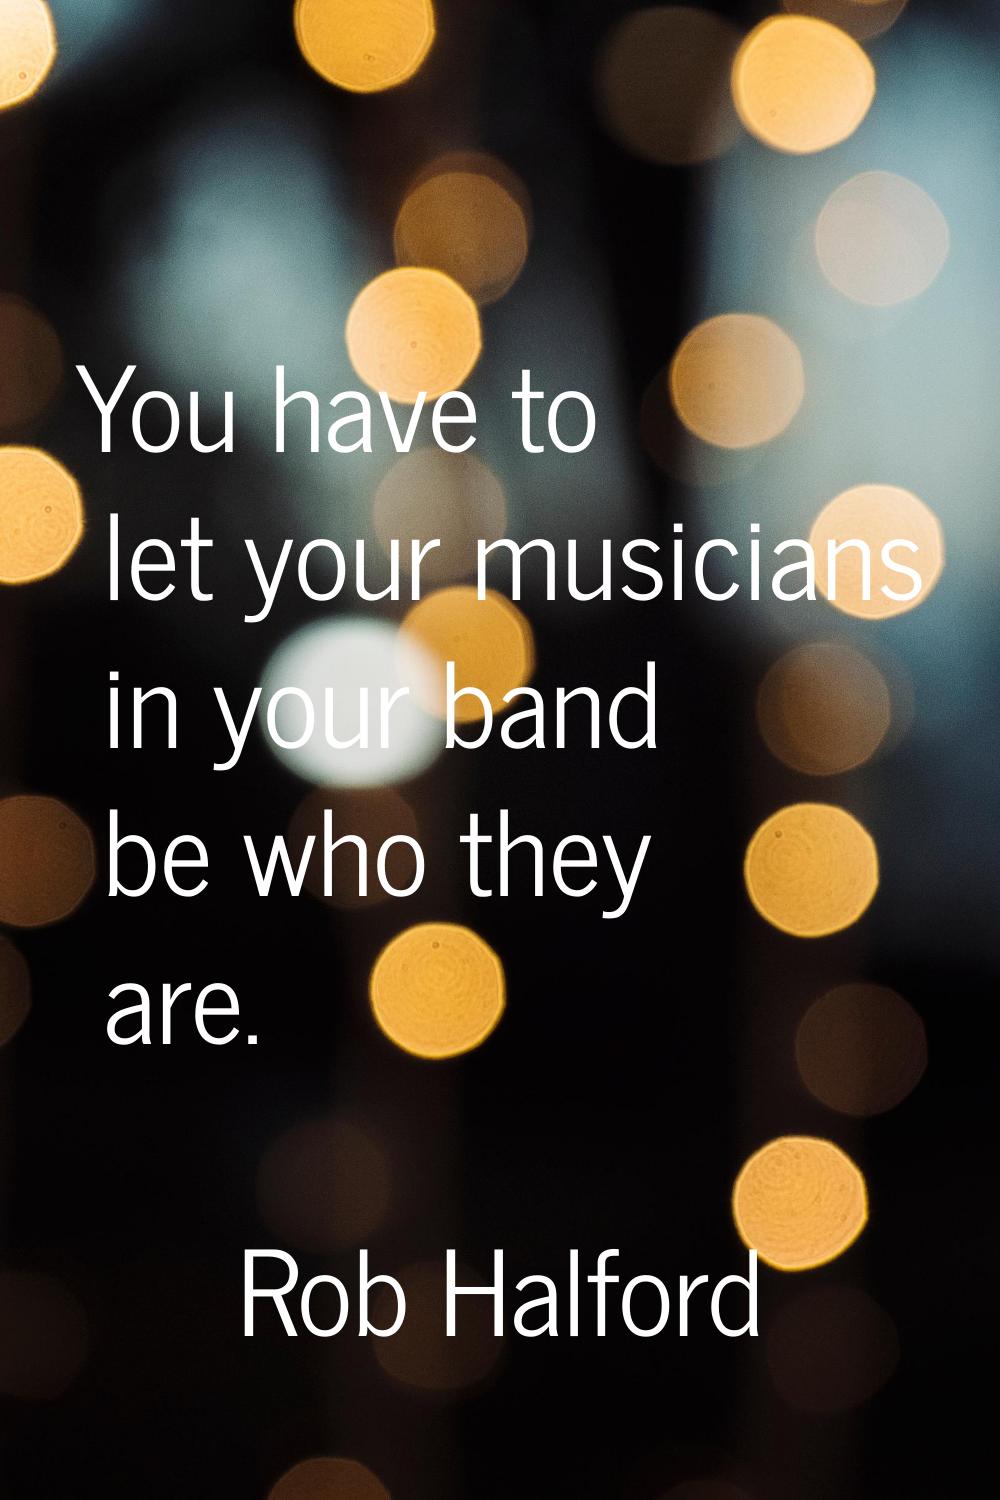 You have to let your musicians in your band be who they are.